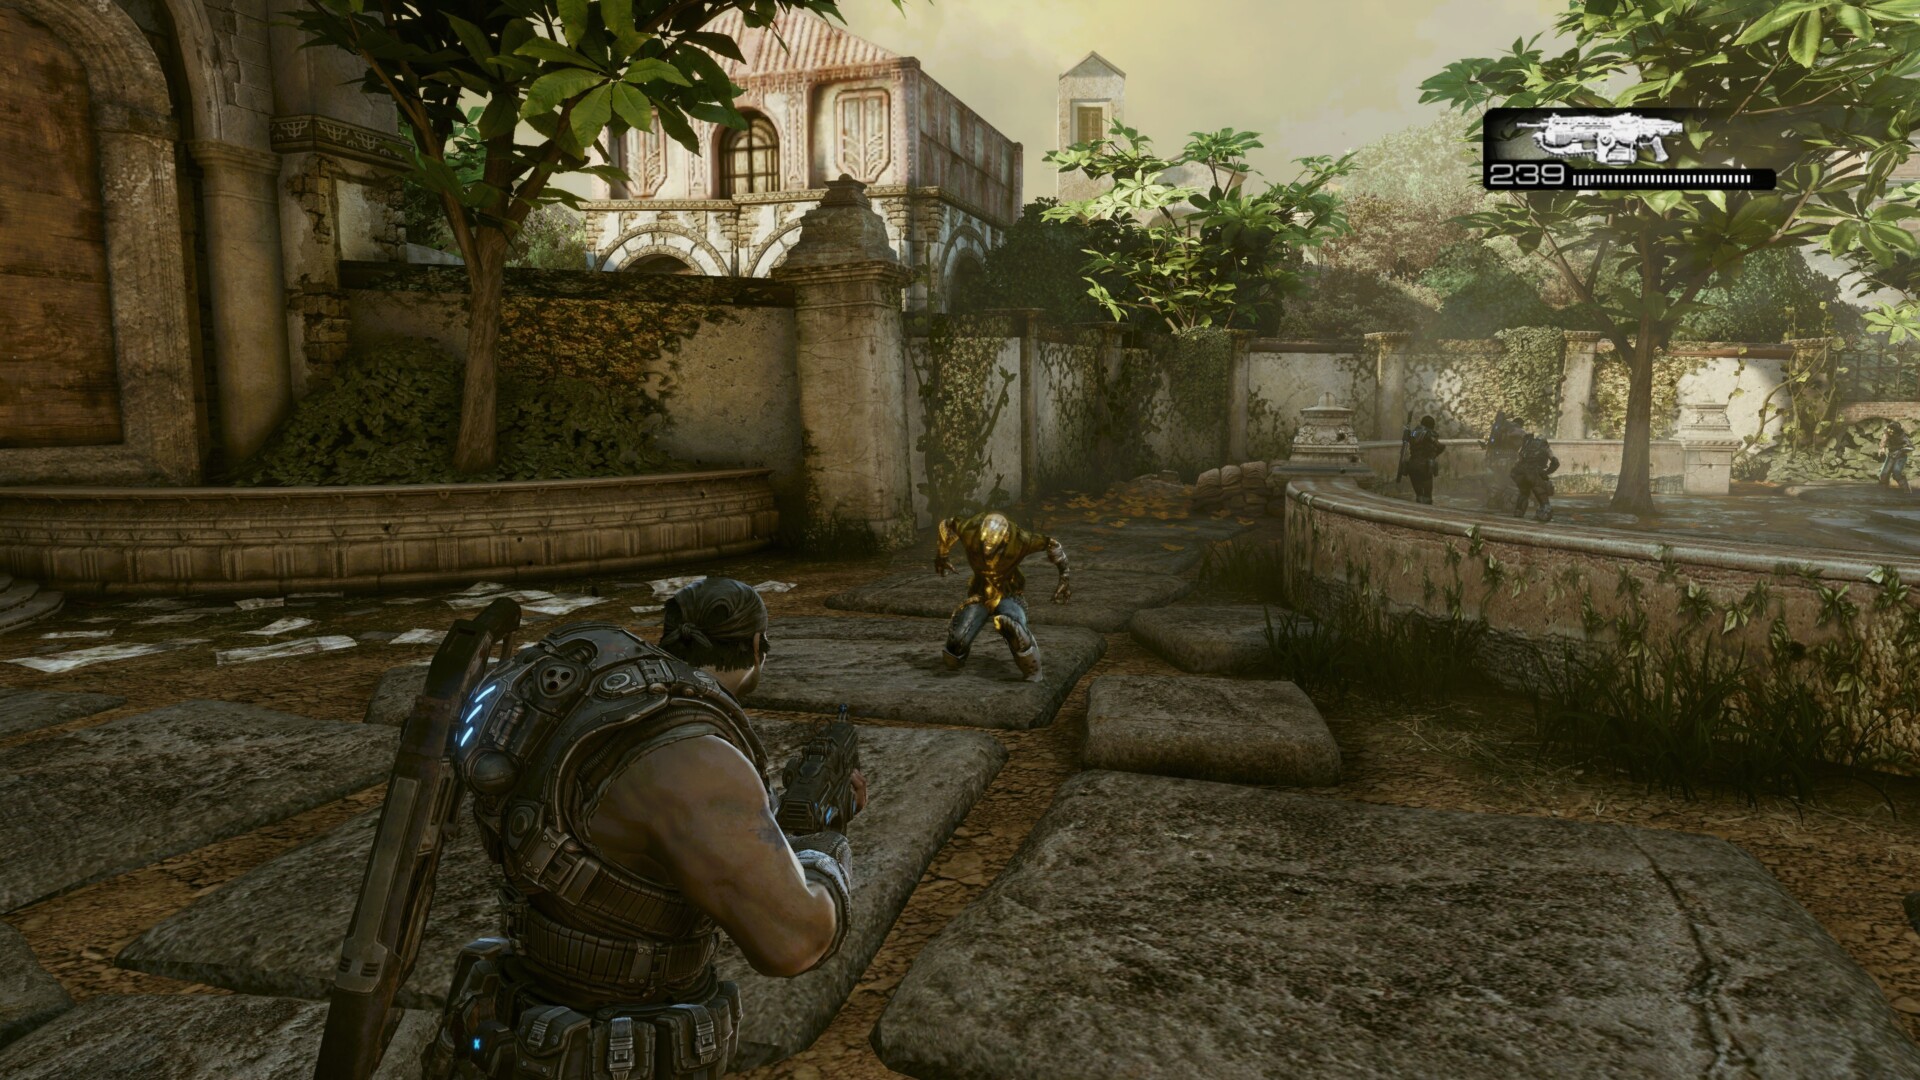 Gears of War 3 anniversary: Epic's trilogy deserves a PC port